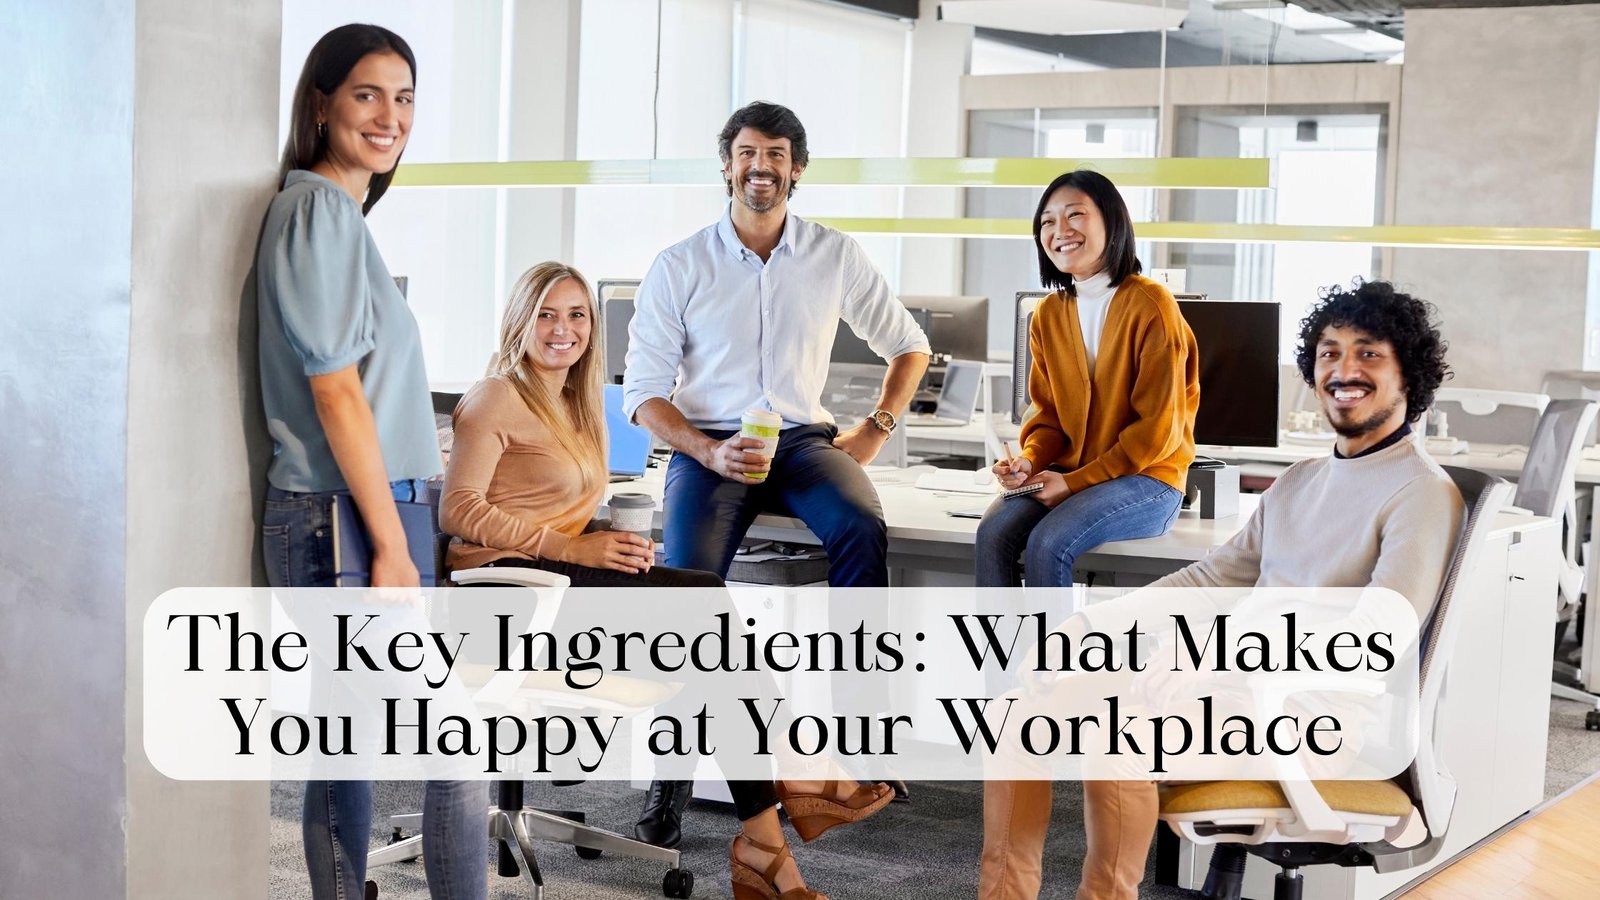 The Key Ingredients: What Makes You Happy At Your Workplace